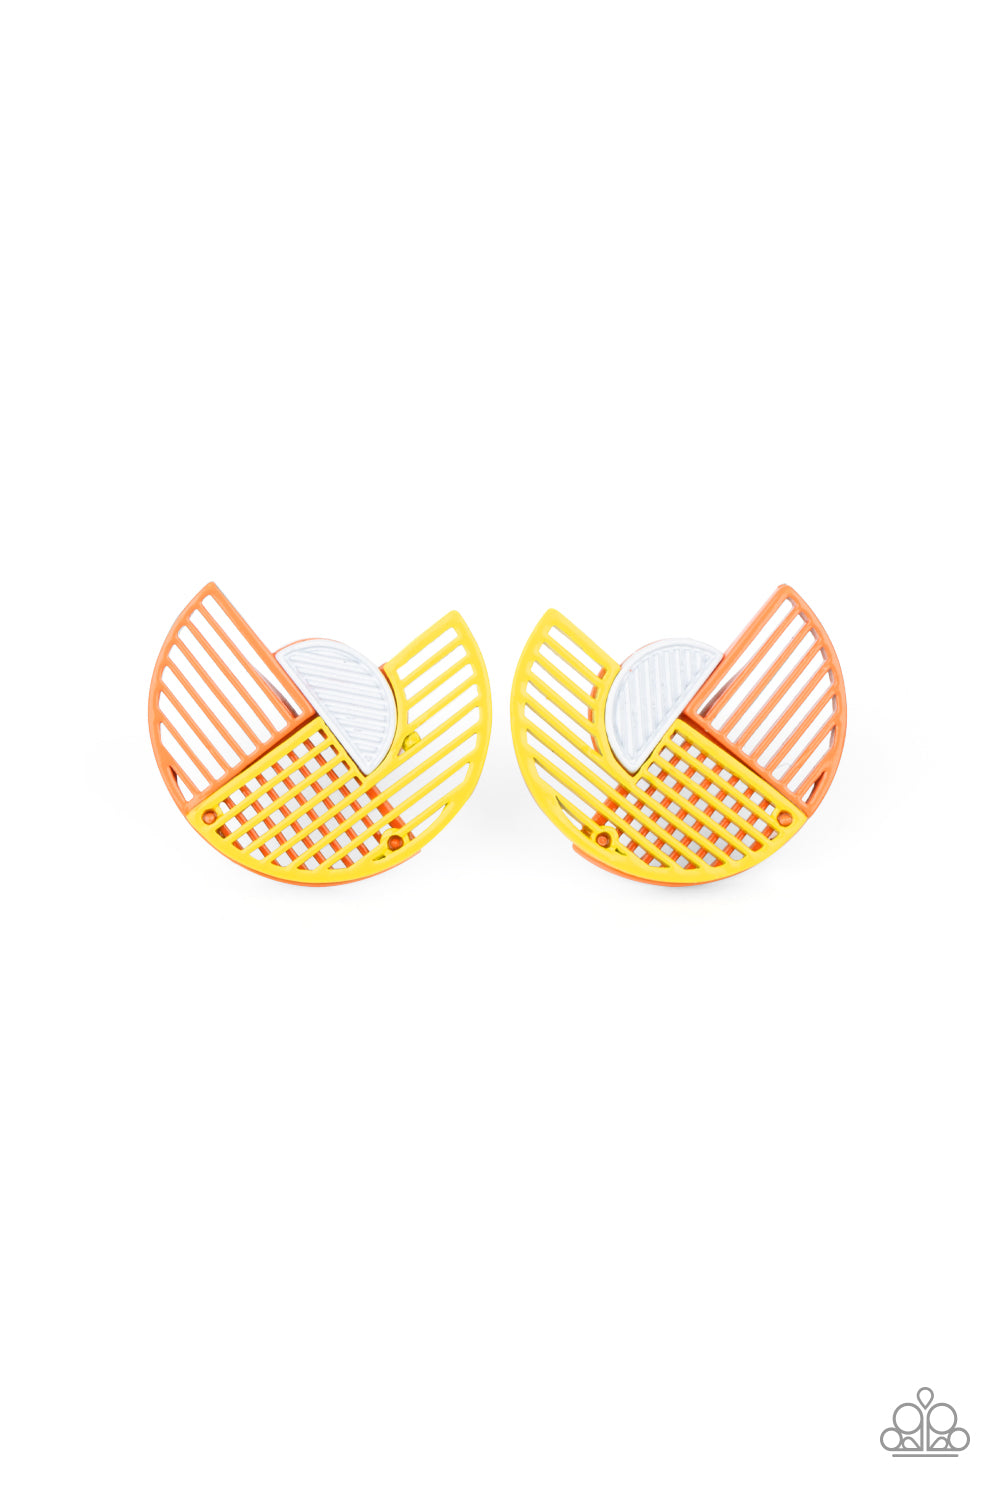 It’s Just an Expression - Yellow/Orange post earrings